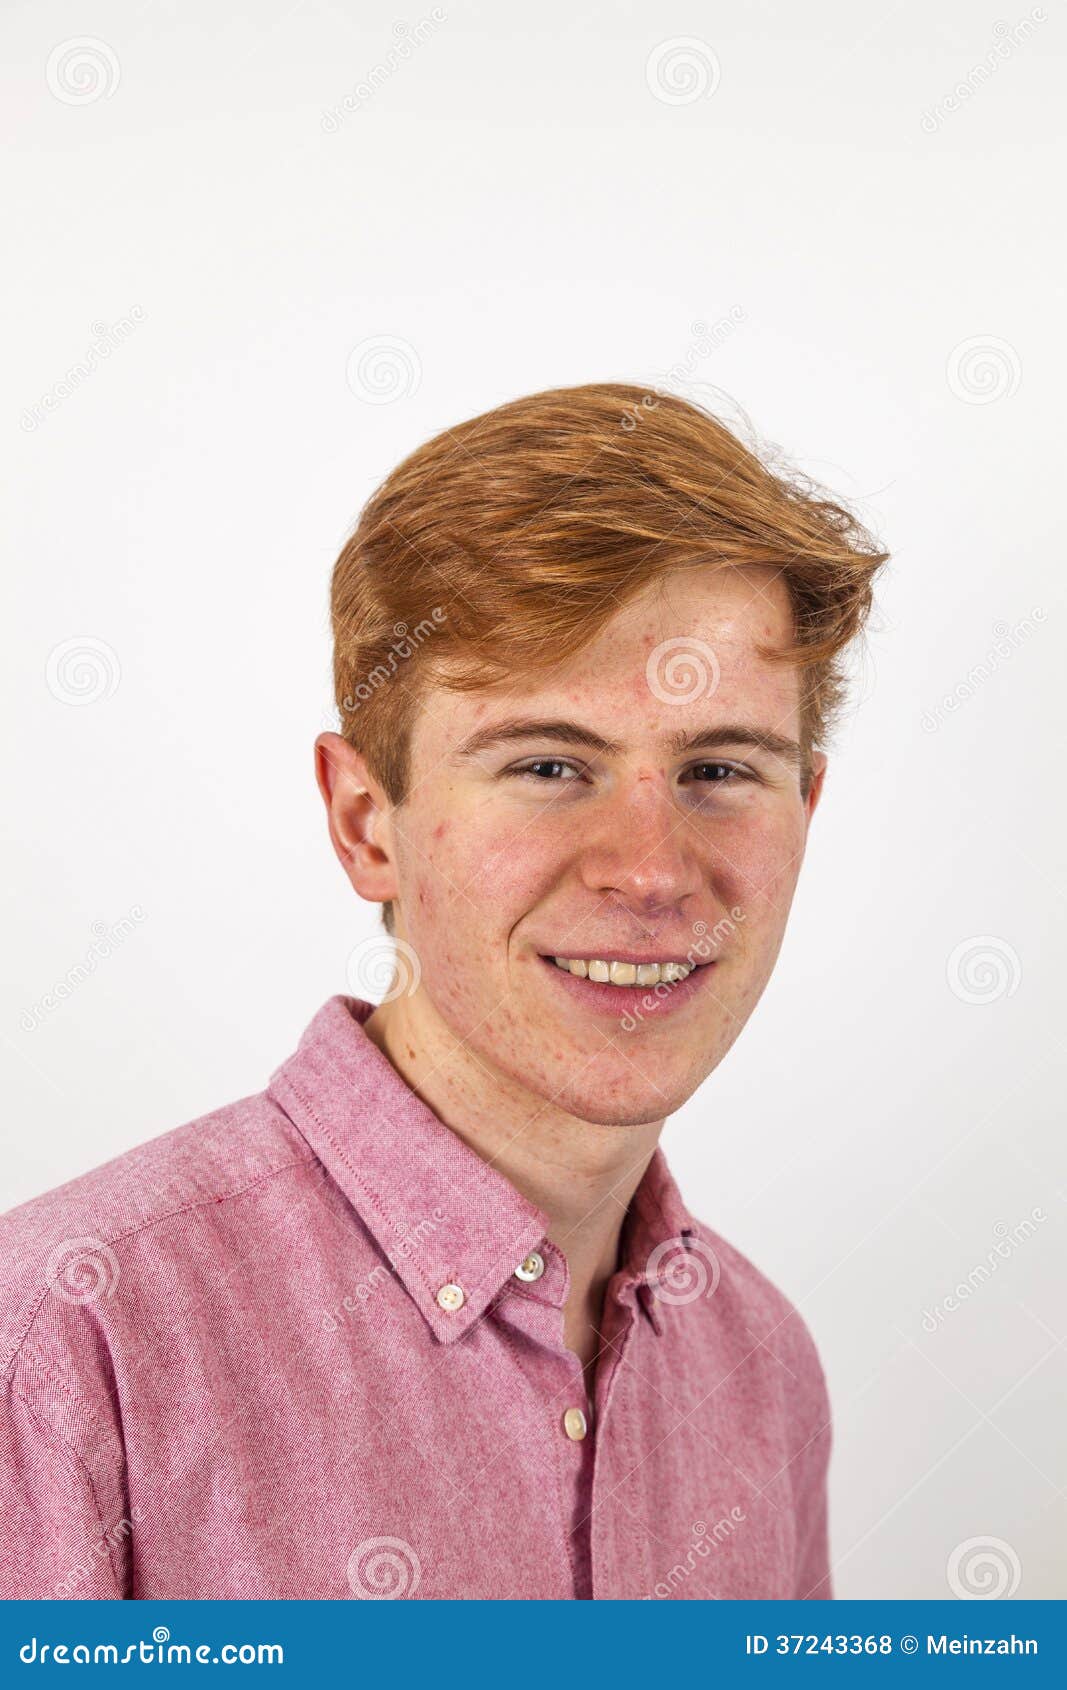 Portrait Of A Smiling Teen Boy With Red Hair Stock Photo Image